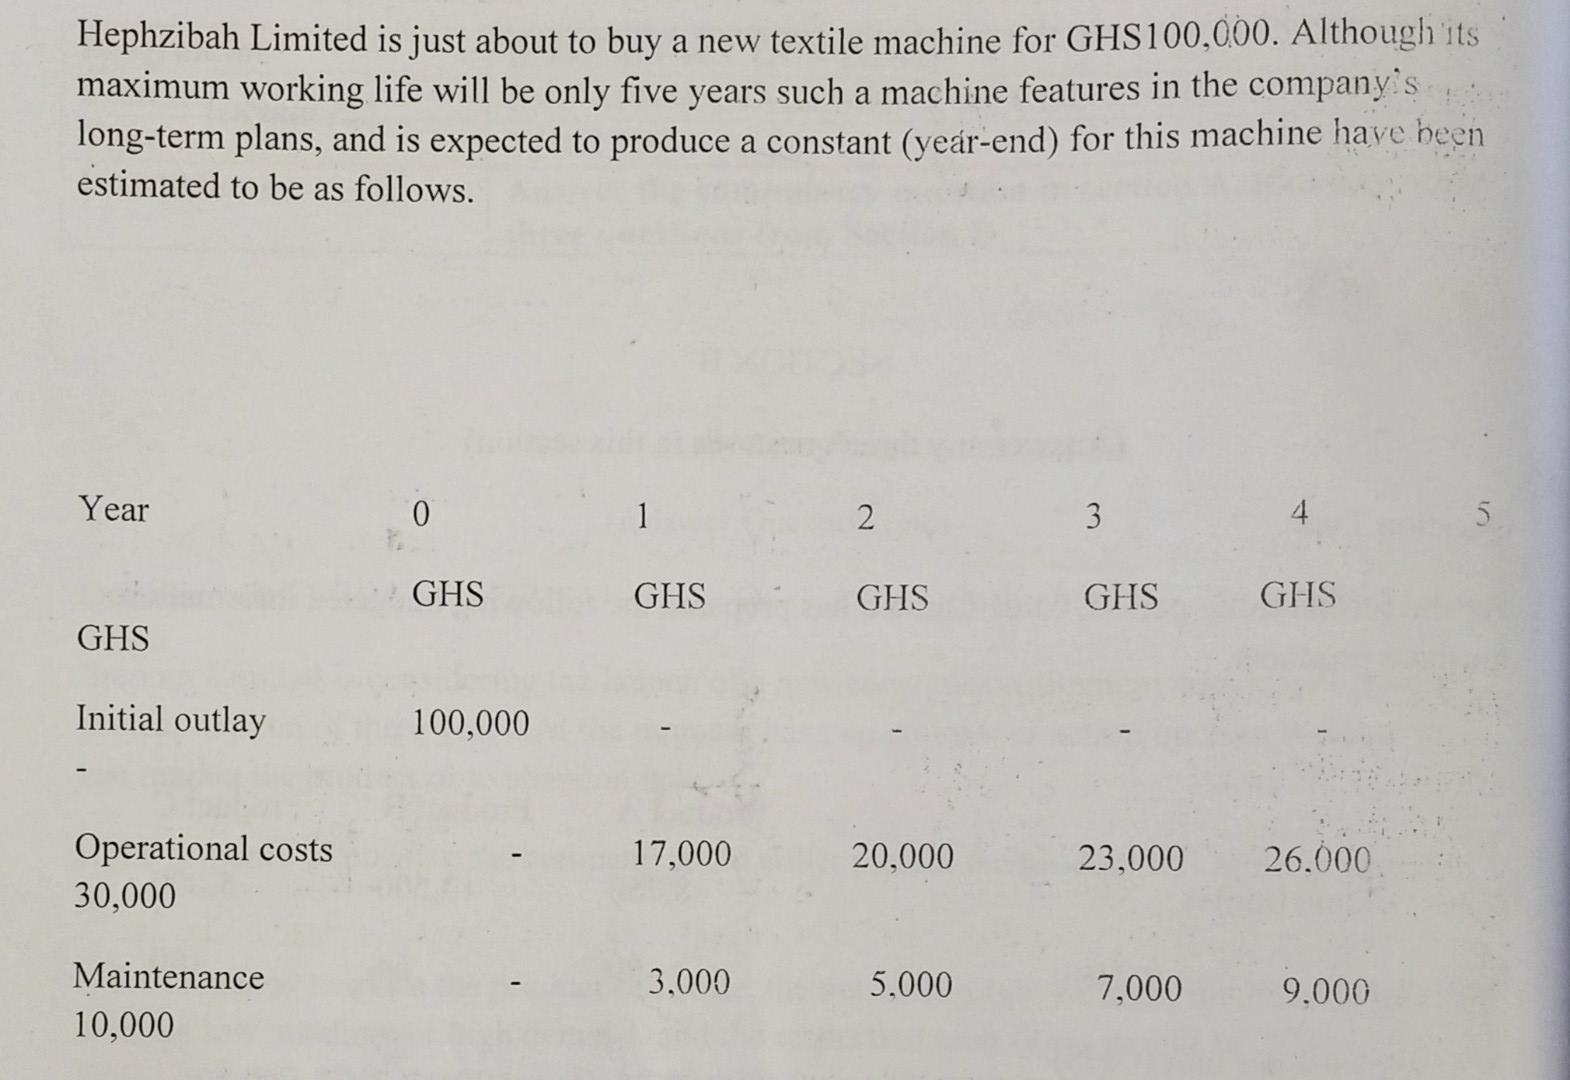 a Hephzibah Limited is just about to buy a new textile machine for GHS100,000. Although its maximum working life will be only